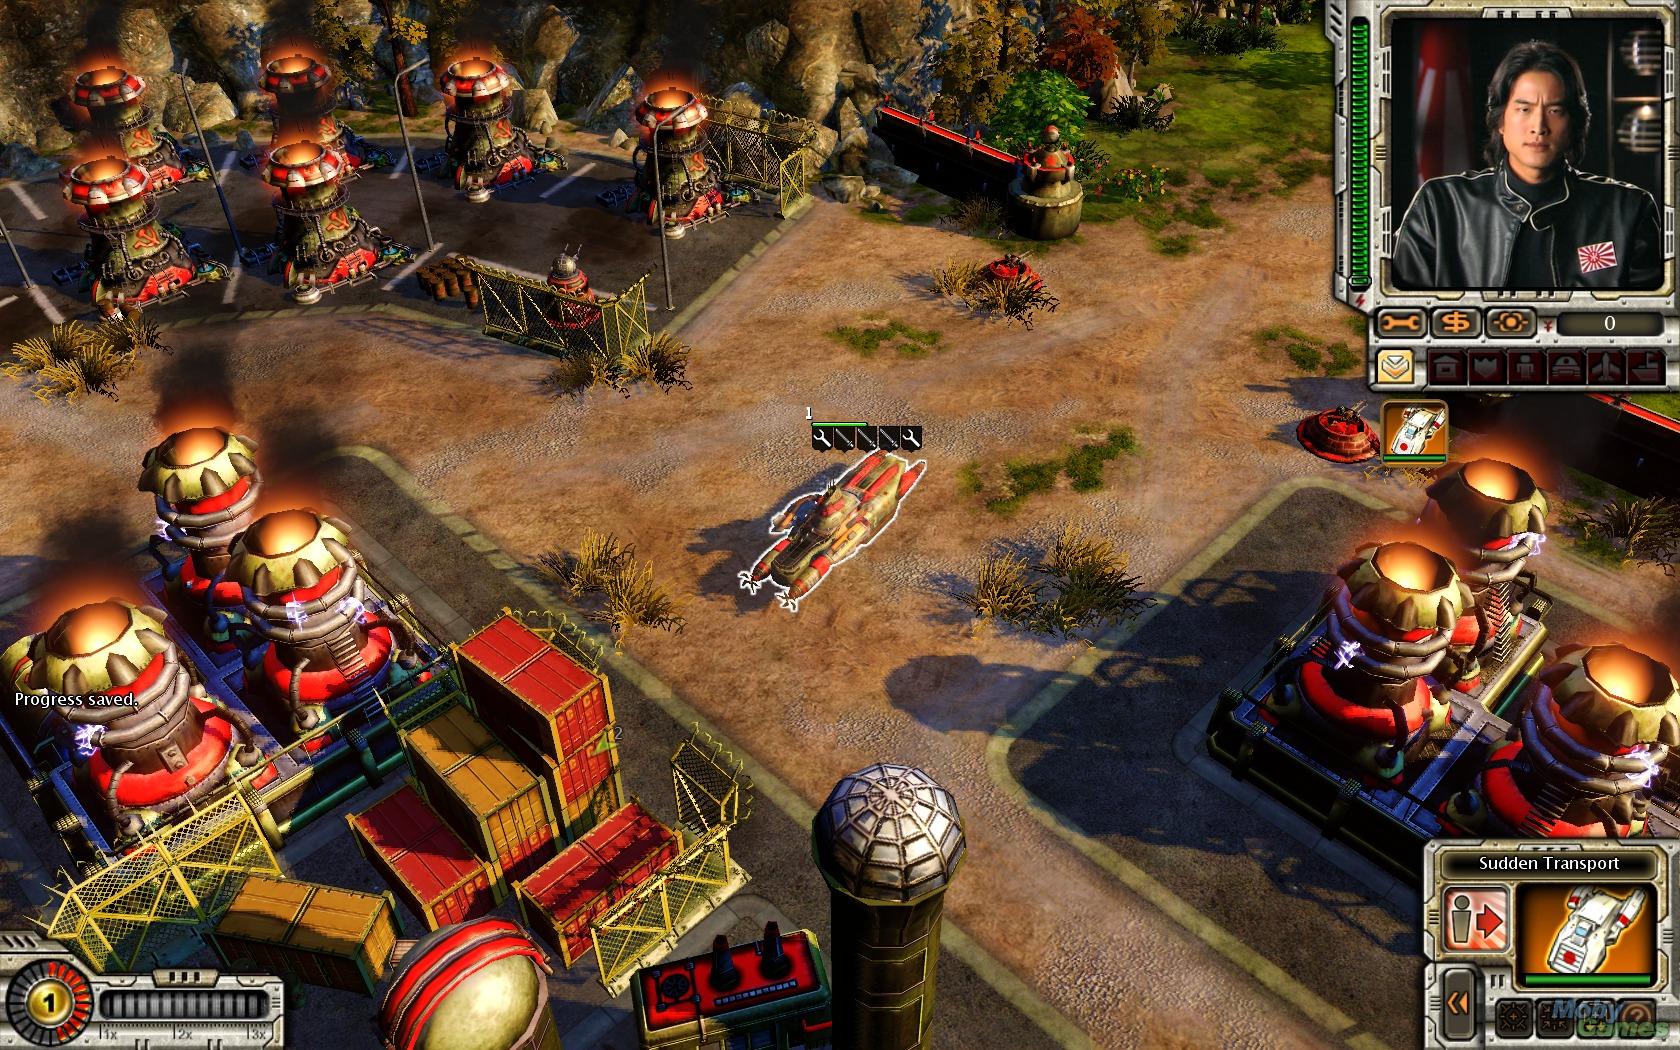 Command & Conquer: Red Alert 3 - Uprising (Steam Key) download